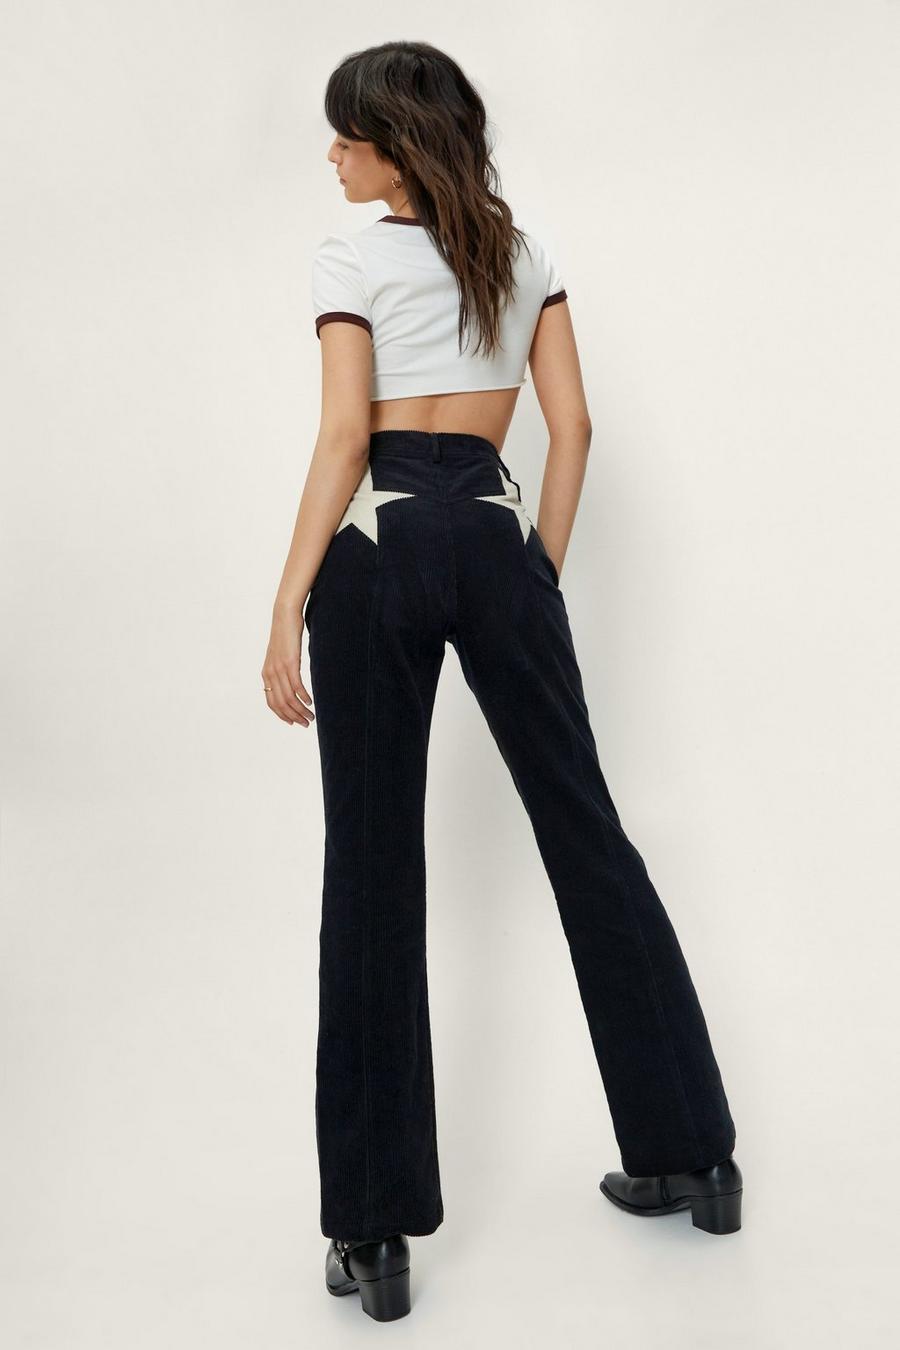 Black Corduroy High Waisted Flared Star Trousers